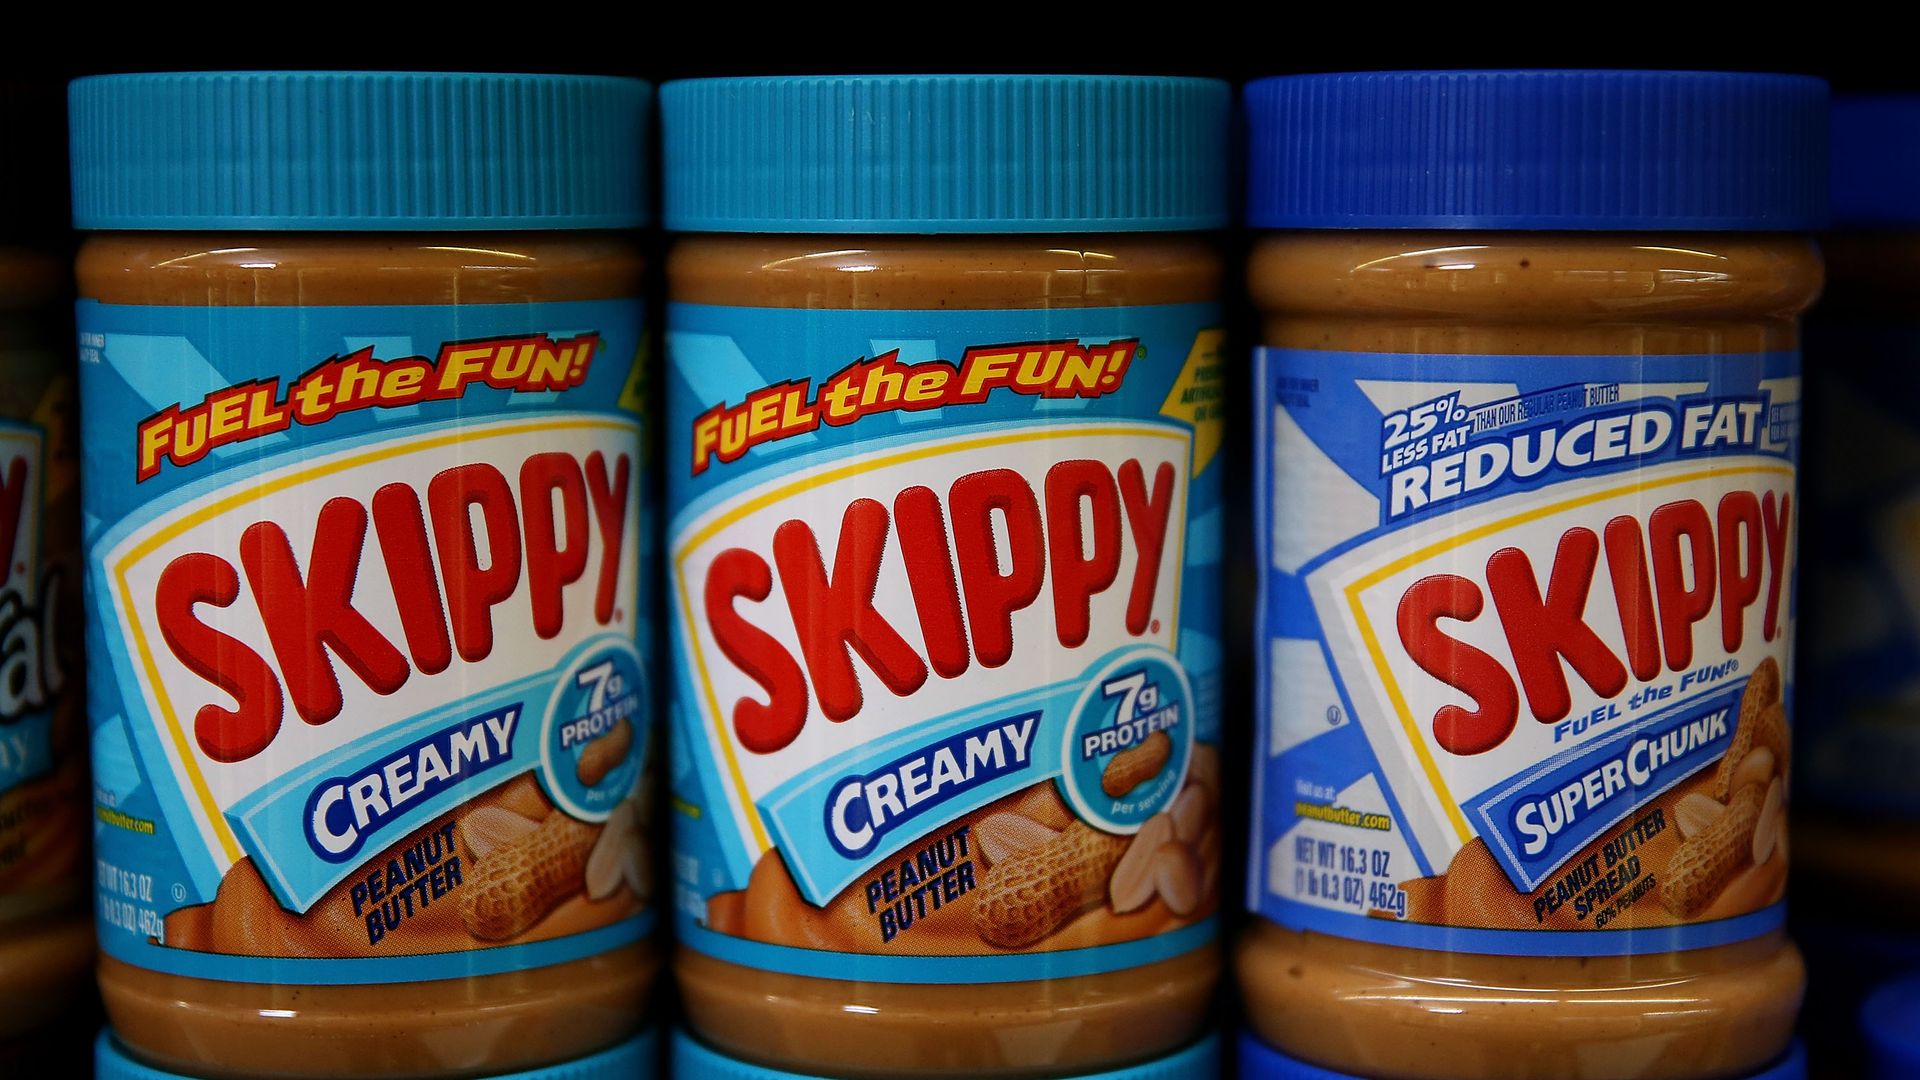 Jars of Skippy peanut butter are displayed on a shelf at a store